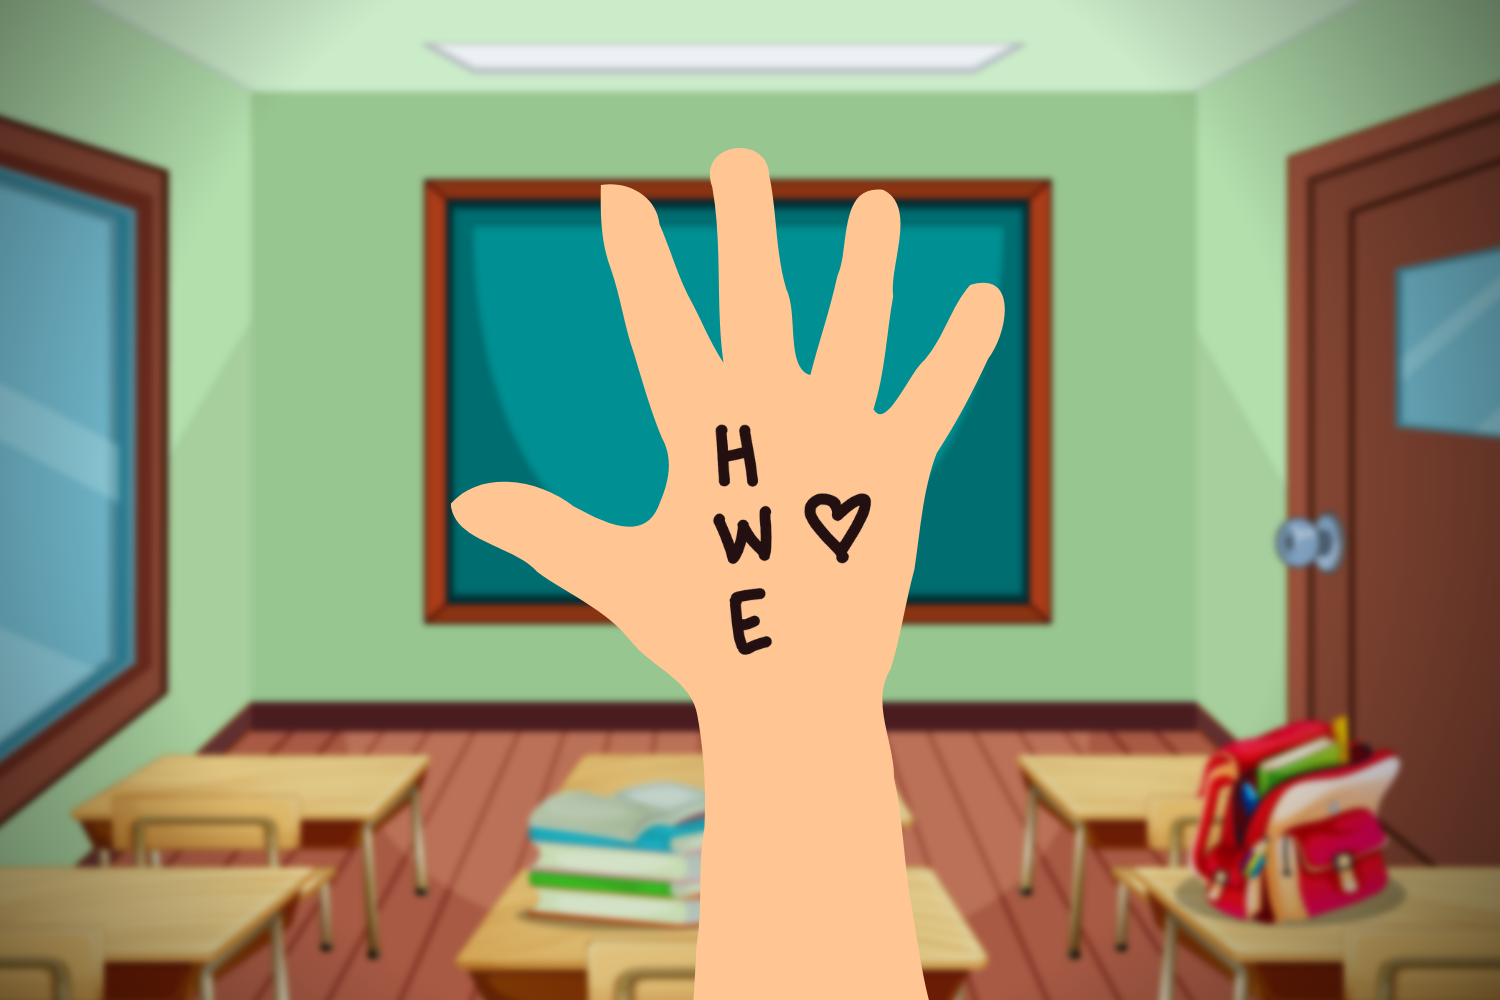 A graphic of the author’s hand with the written initials of the kids who lost their lives at the Covenant School shooting (Hallie, William and Evelyn). (Hustler Multimedia/Lexie Perez)
